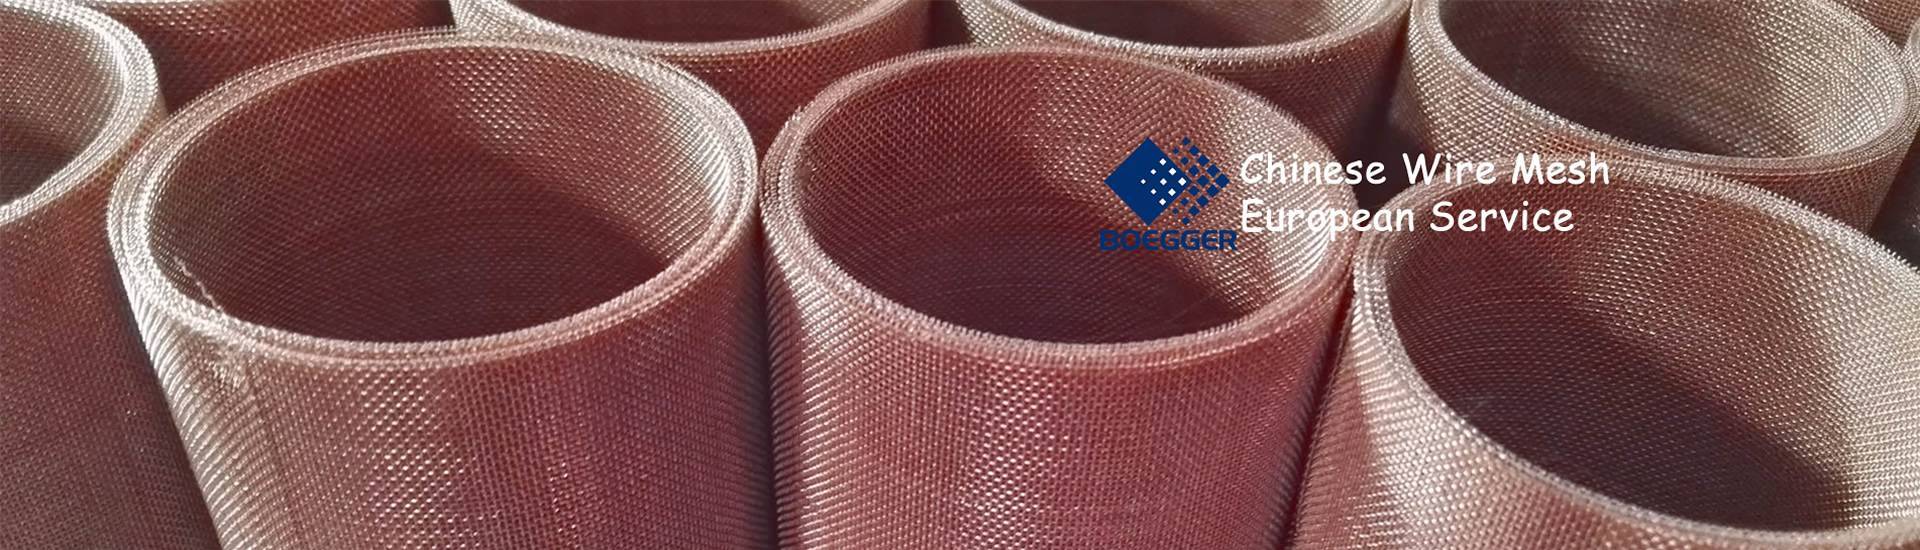 There are several rolls of coarse copper mesh gathering together, the structure is even and surface is bright.